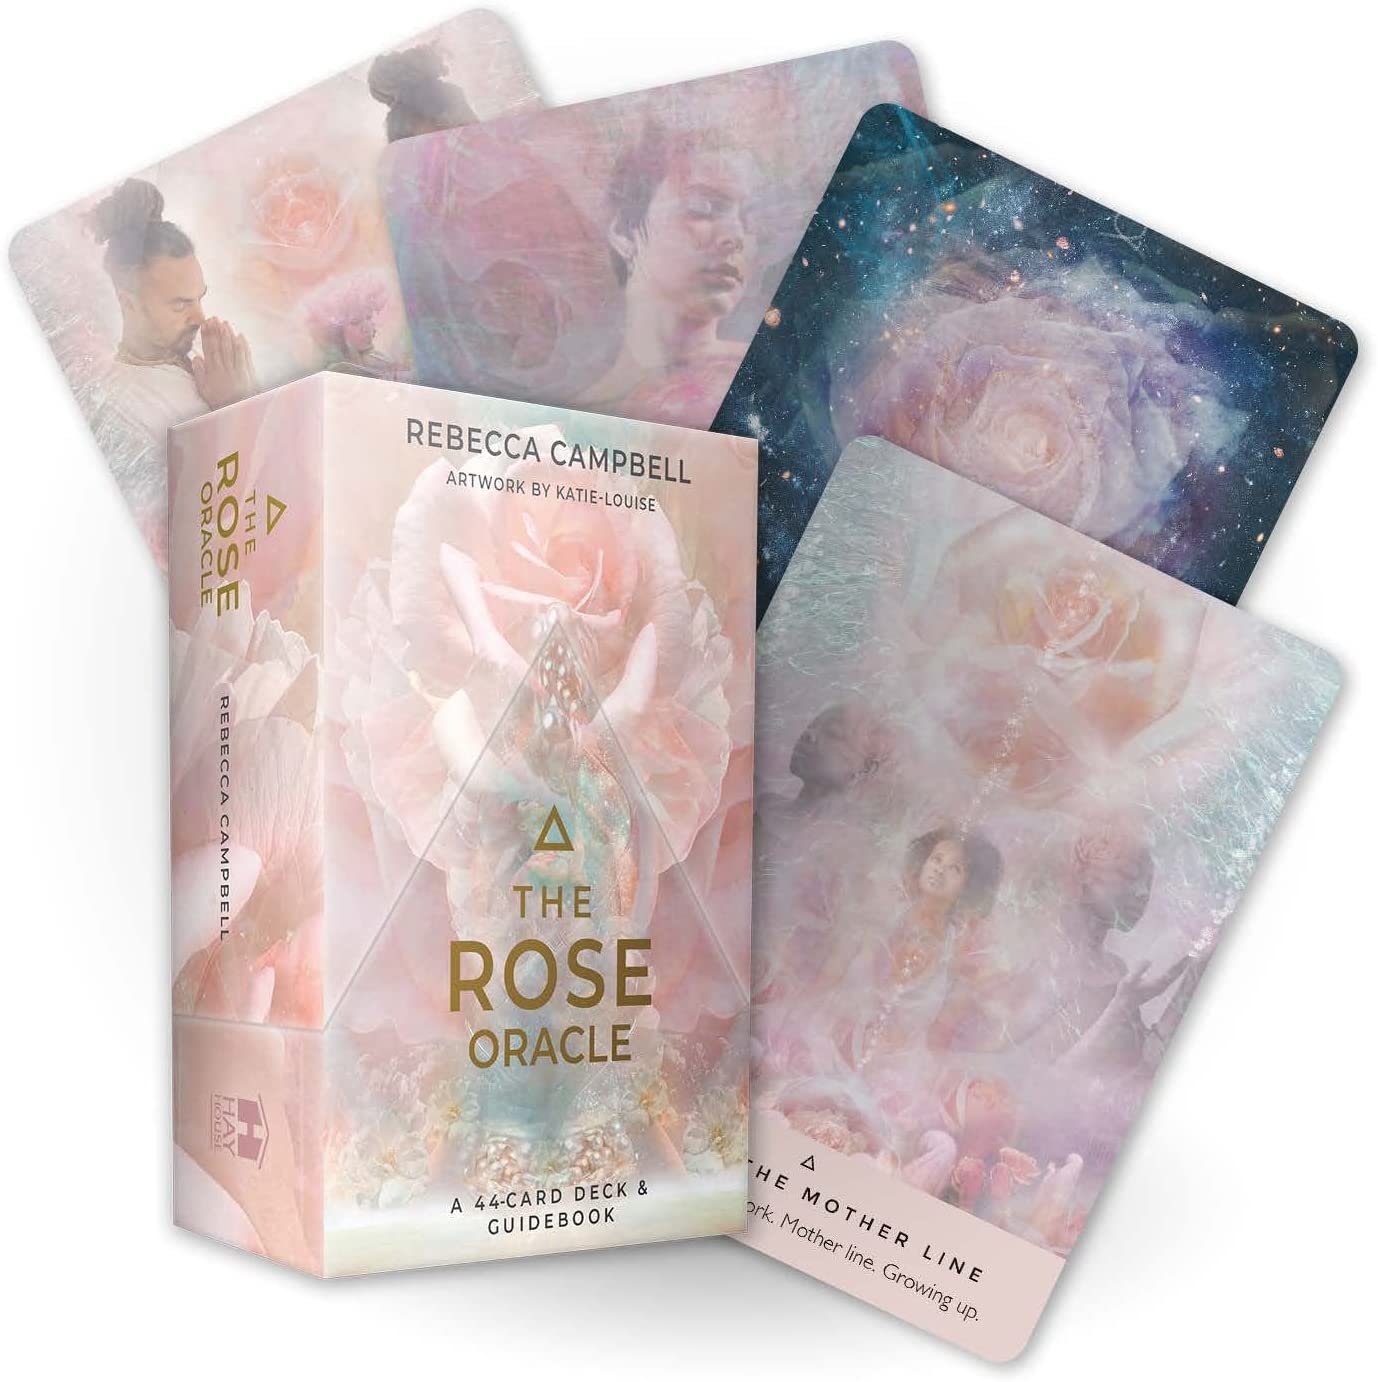 The rose oracle, Rebecca Campbell